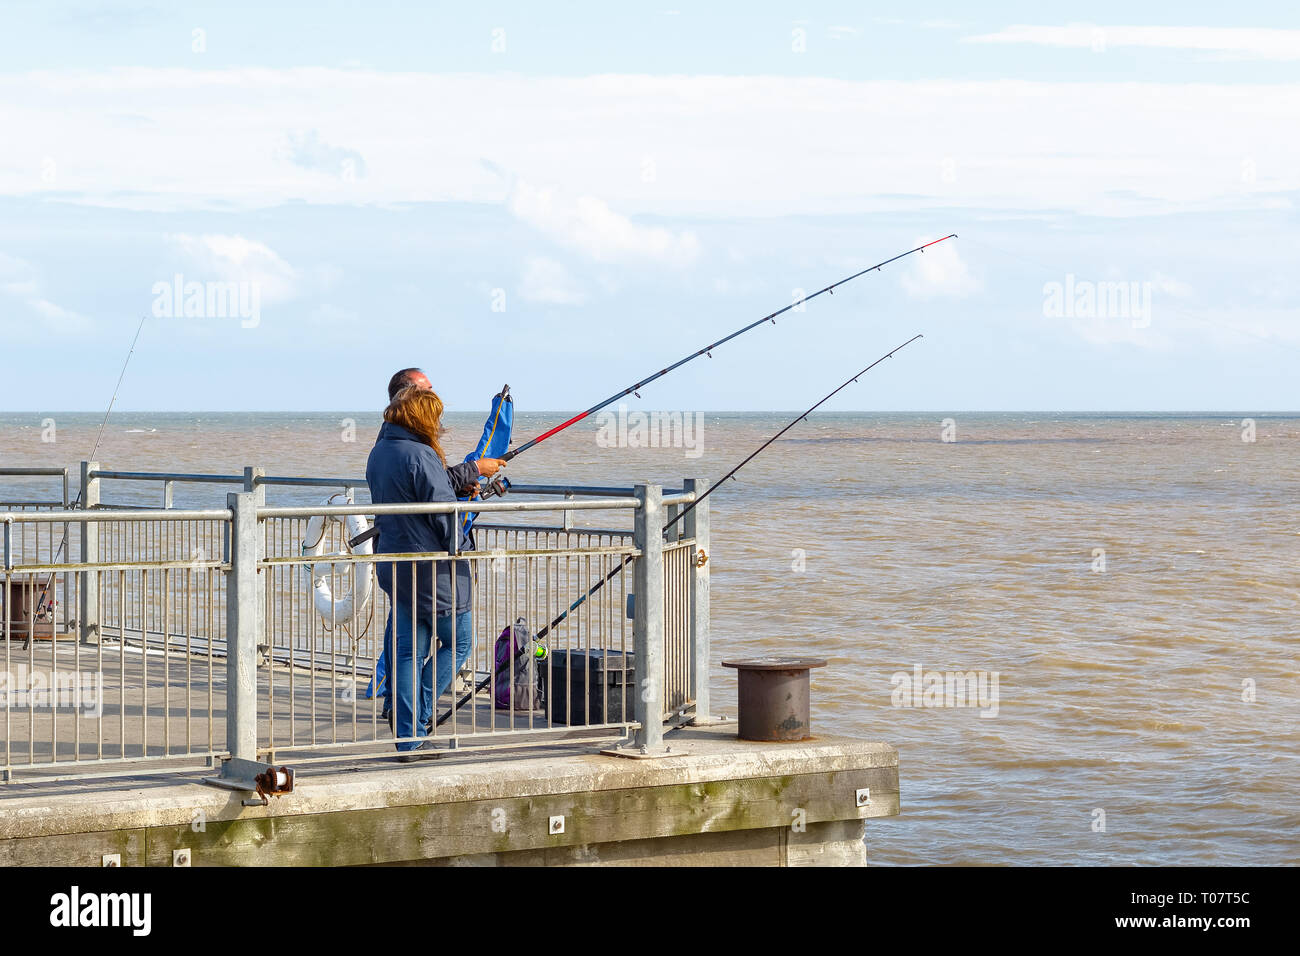 Southwold, UK - September 10, 18 - People fishing with fishing rods on Southwold Pier Stock Photo